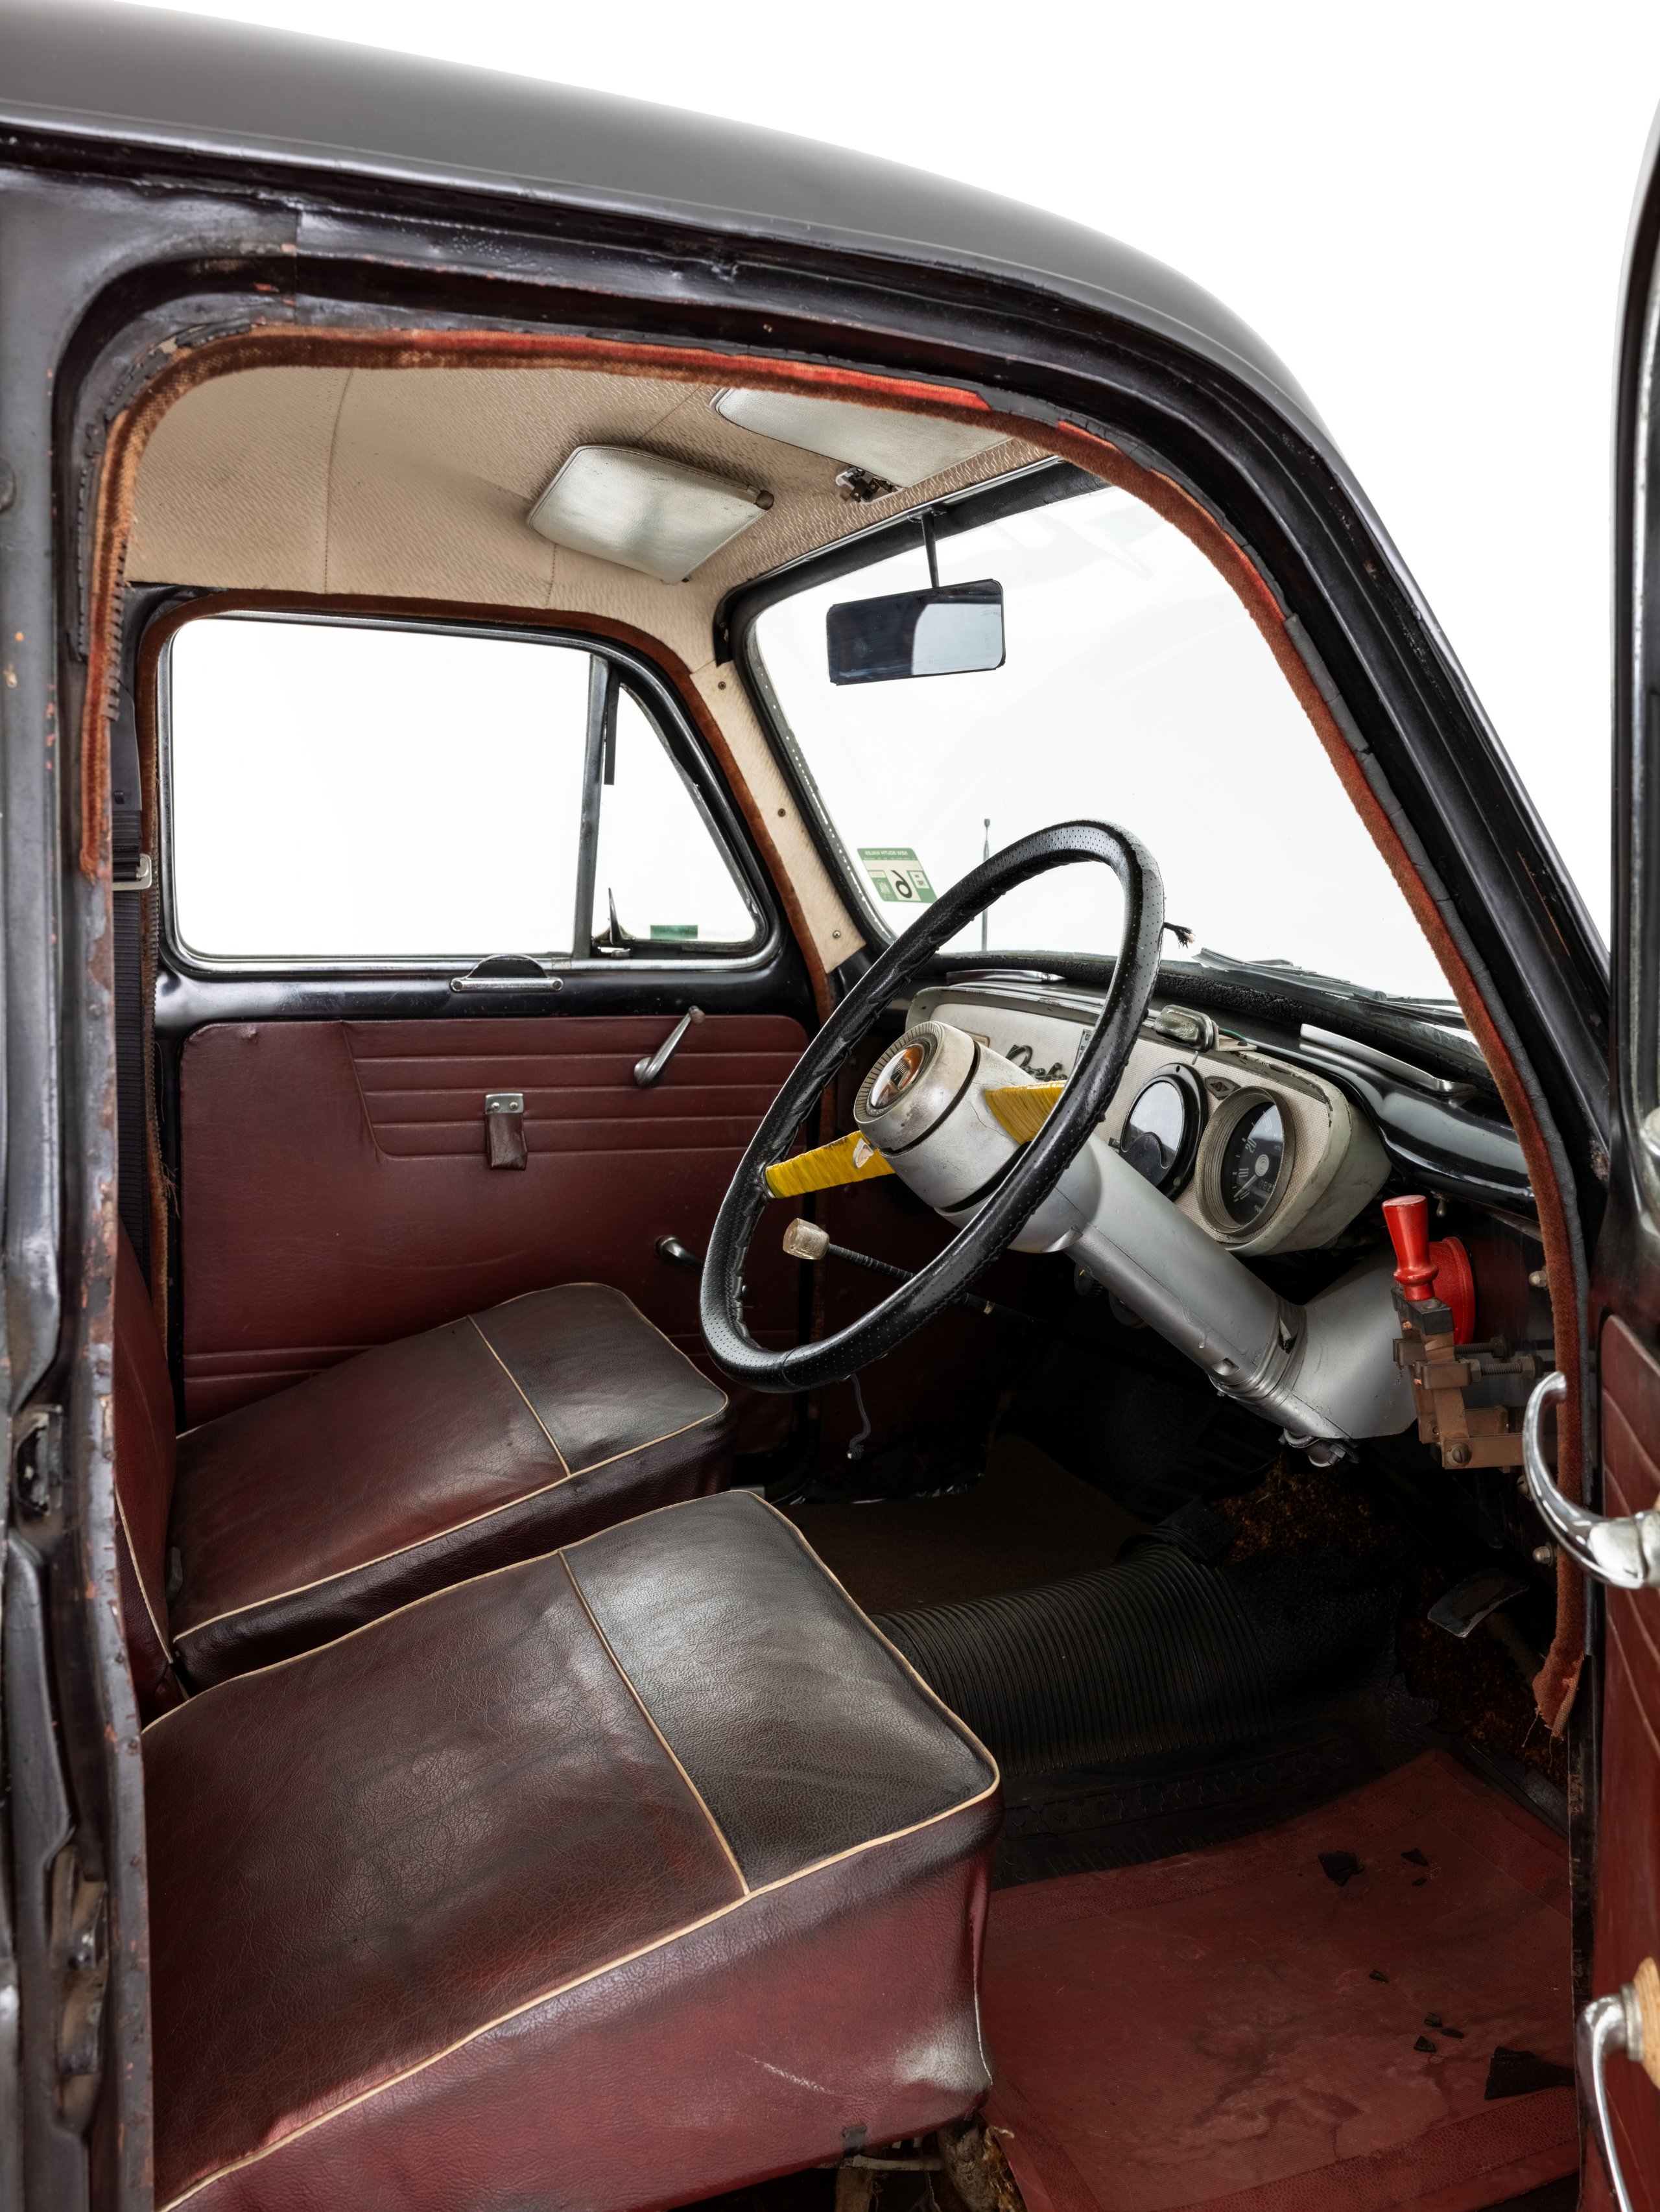 1959 Ford Prefect model 100E converted to electric power